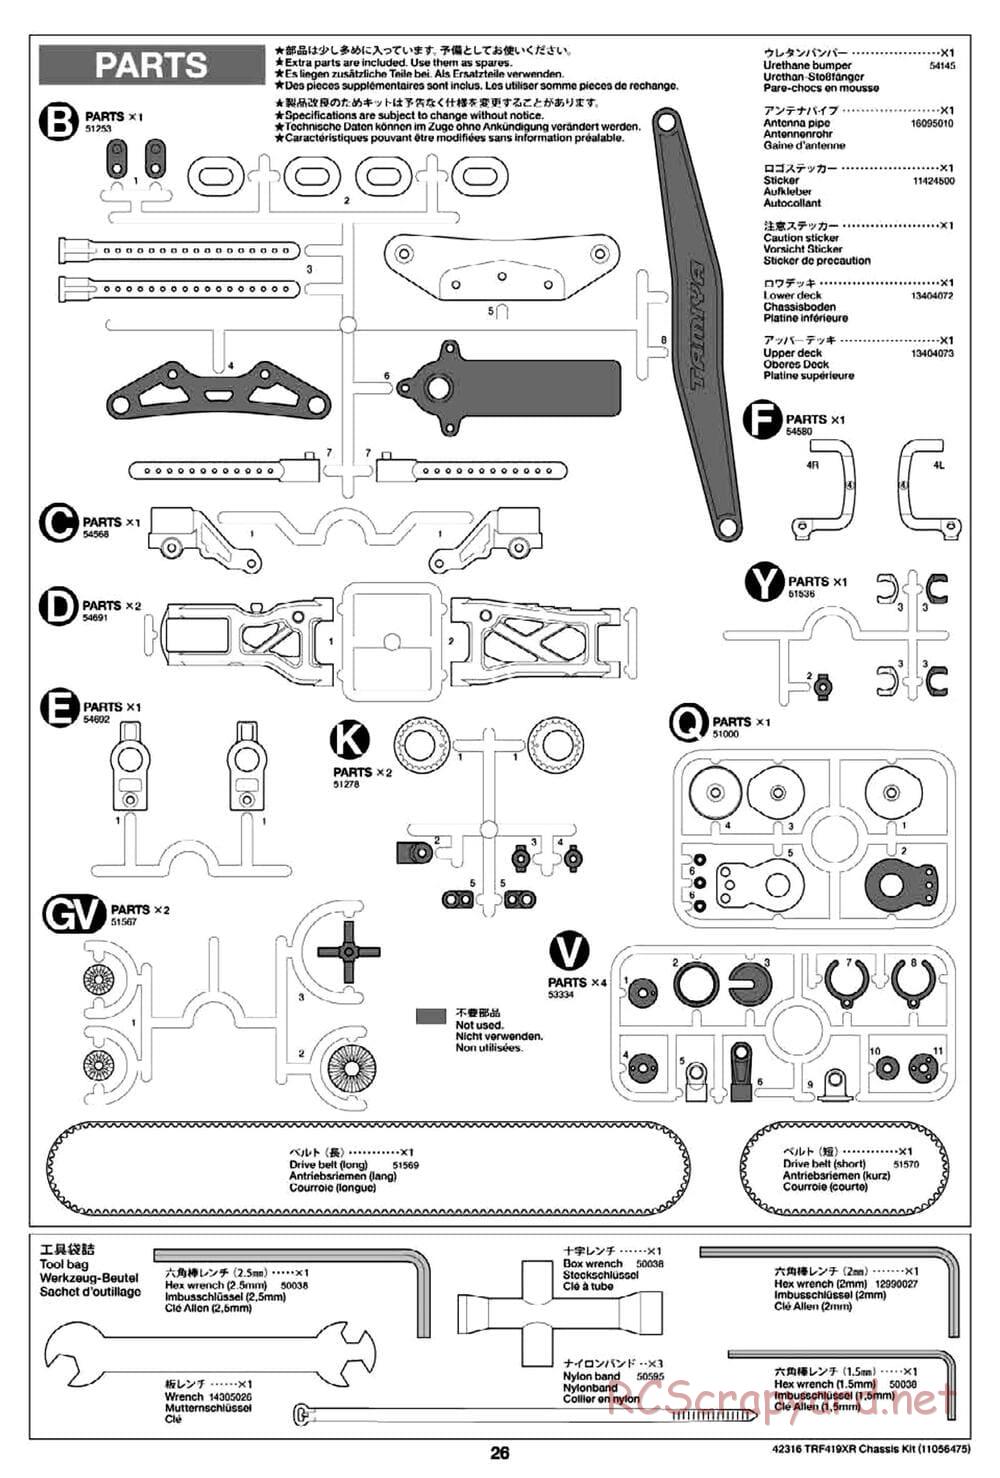 Tamiya - TRF419XR Chassis - Manual - Page 26